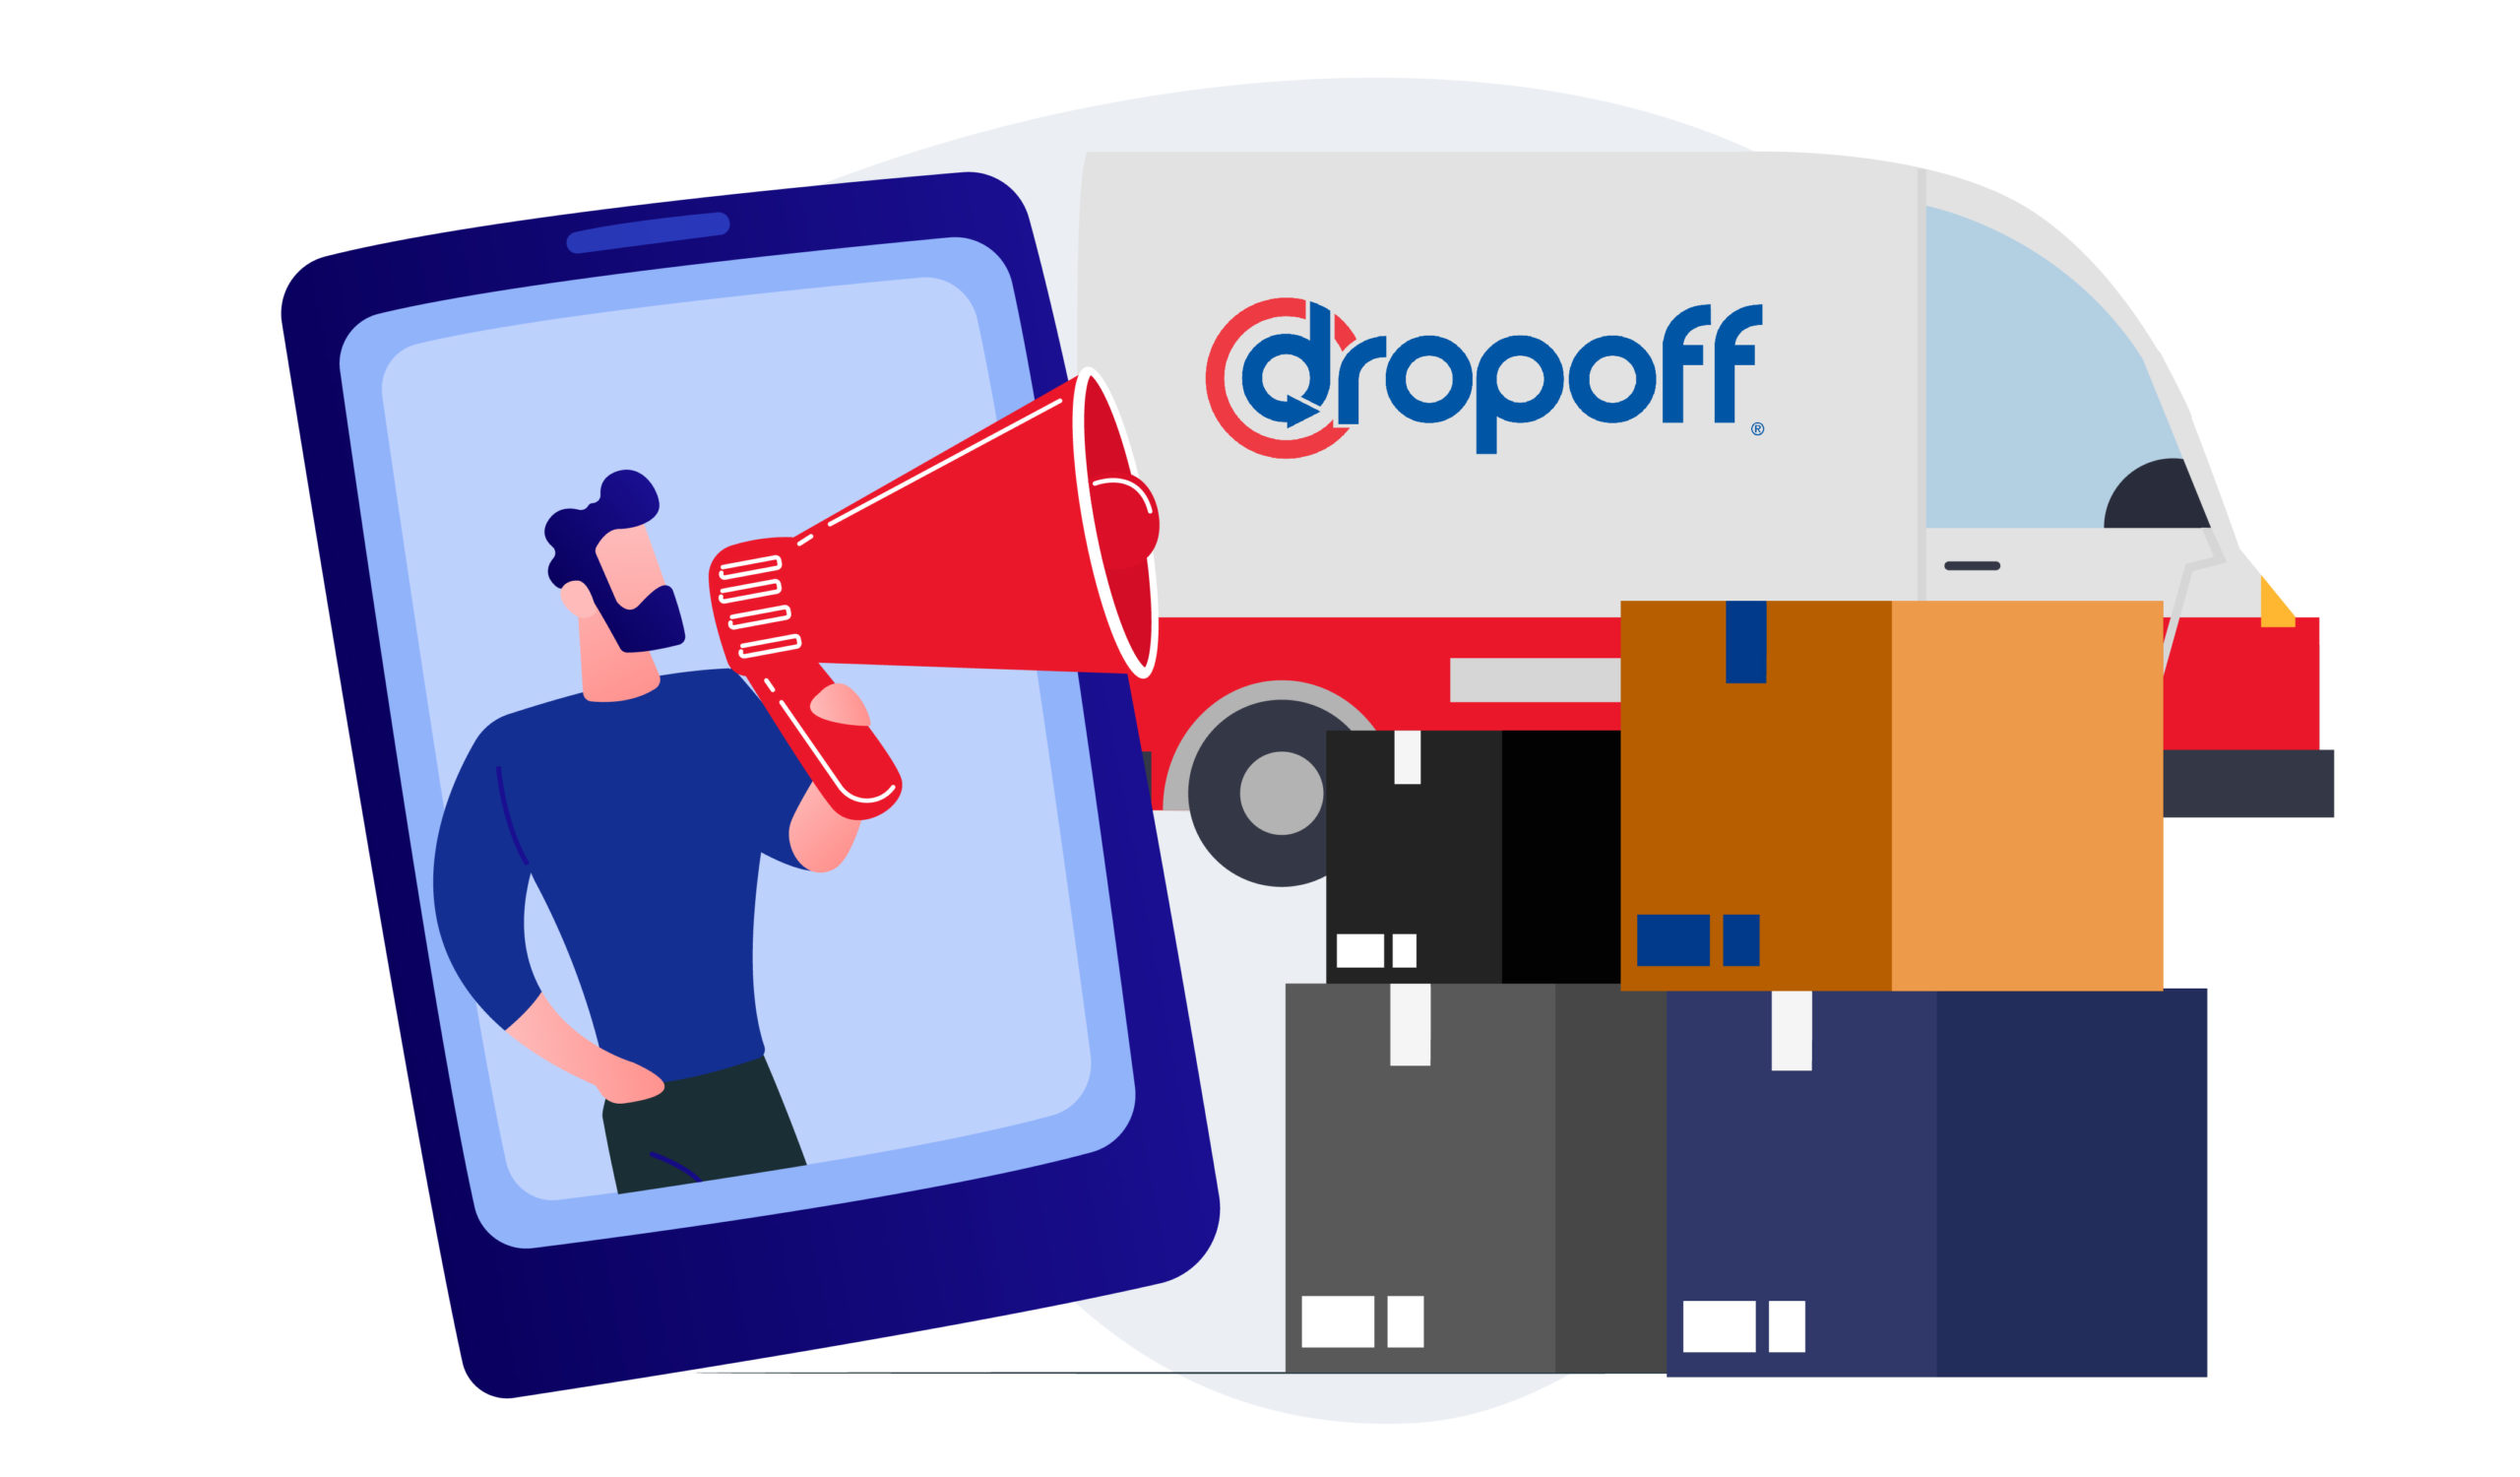 Increase revenue for fashion retailers by offering same-day delivery - Dropoff